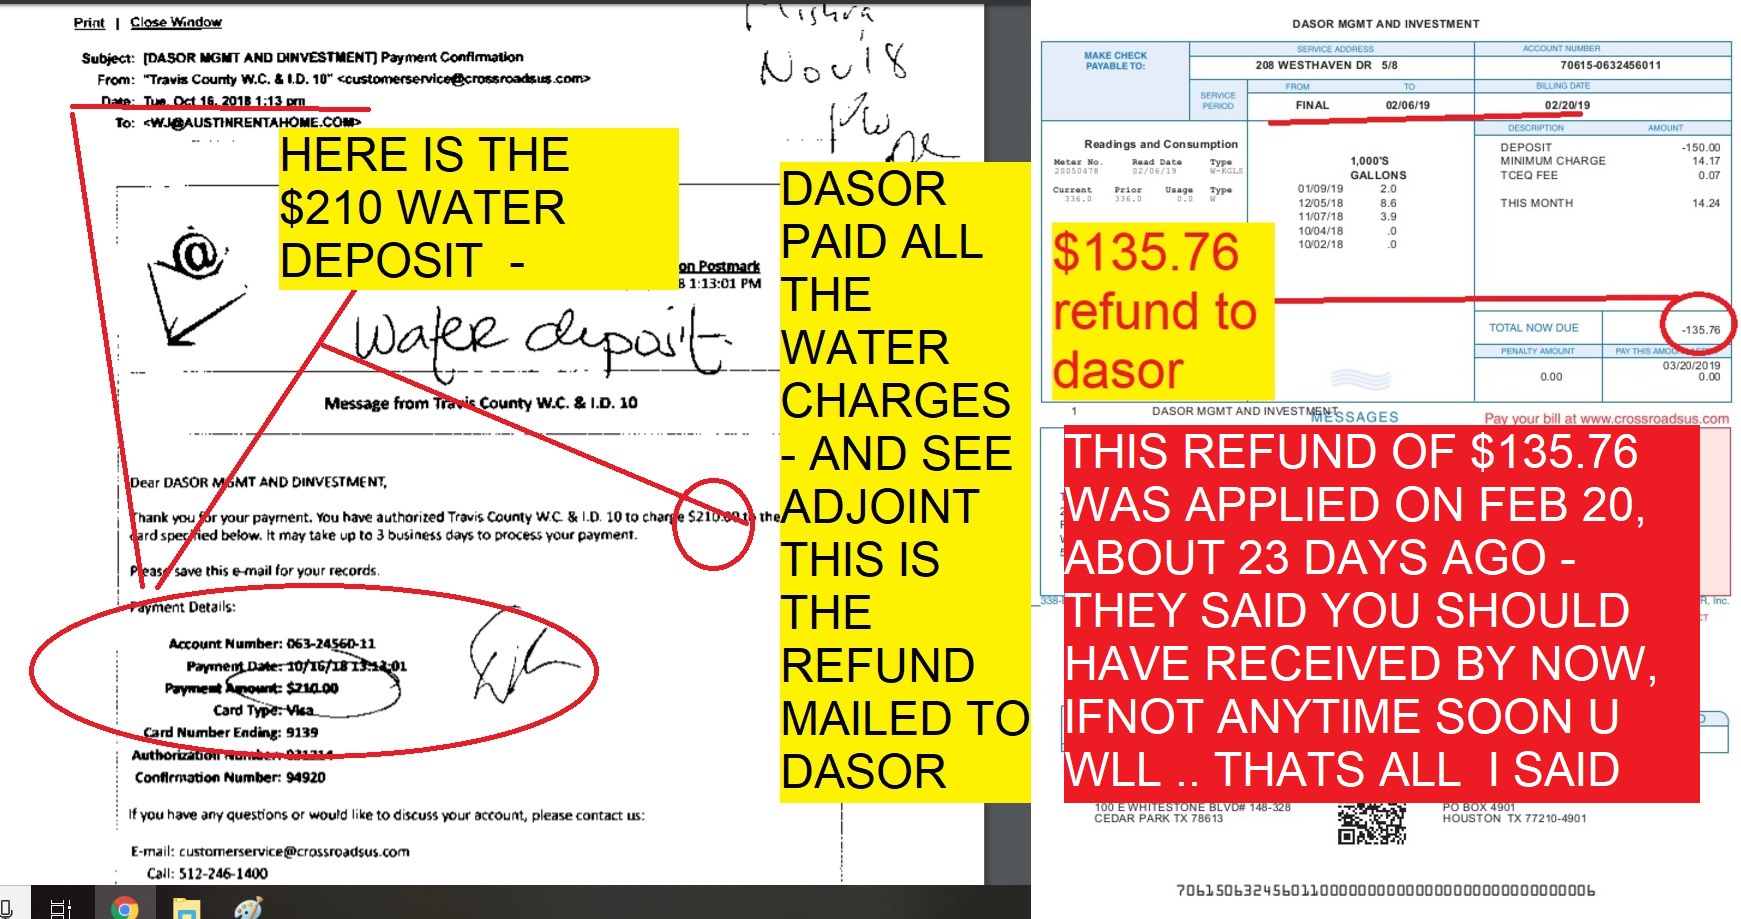 WATER DEPSOIT OF $210 AND THE CORRESPONDING WATER DEPOSIT REFUND OF $135.76 AFTER CLOSING THE DASOR WATER ACCOUNT - FINAL SETTLEMENT REFUND MAILE DTO DASOR